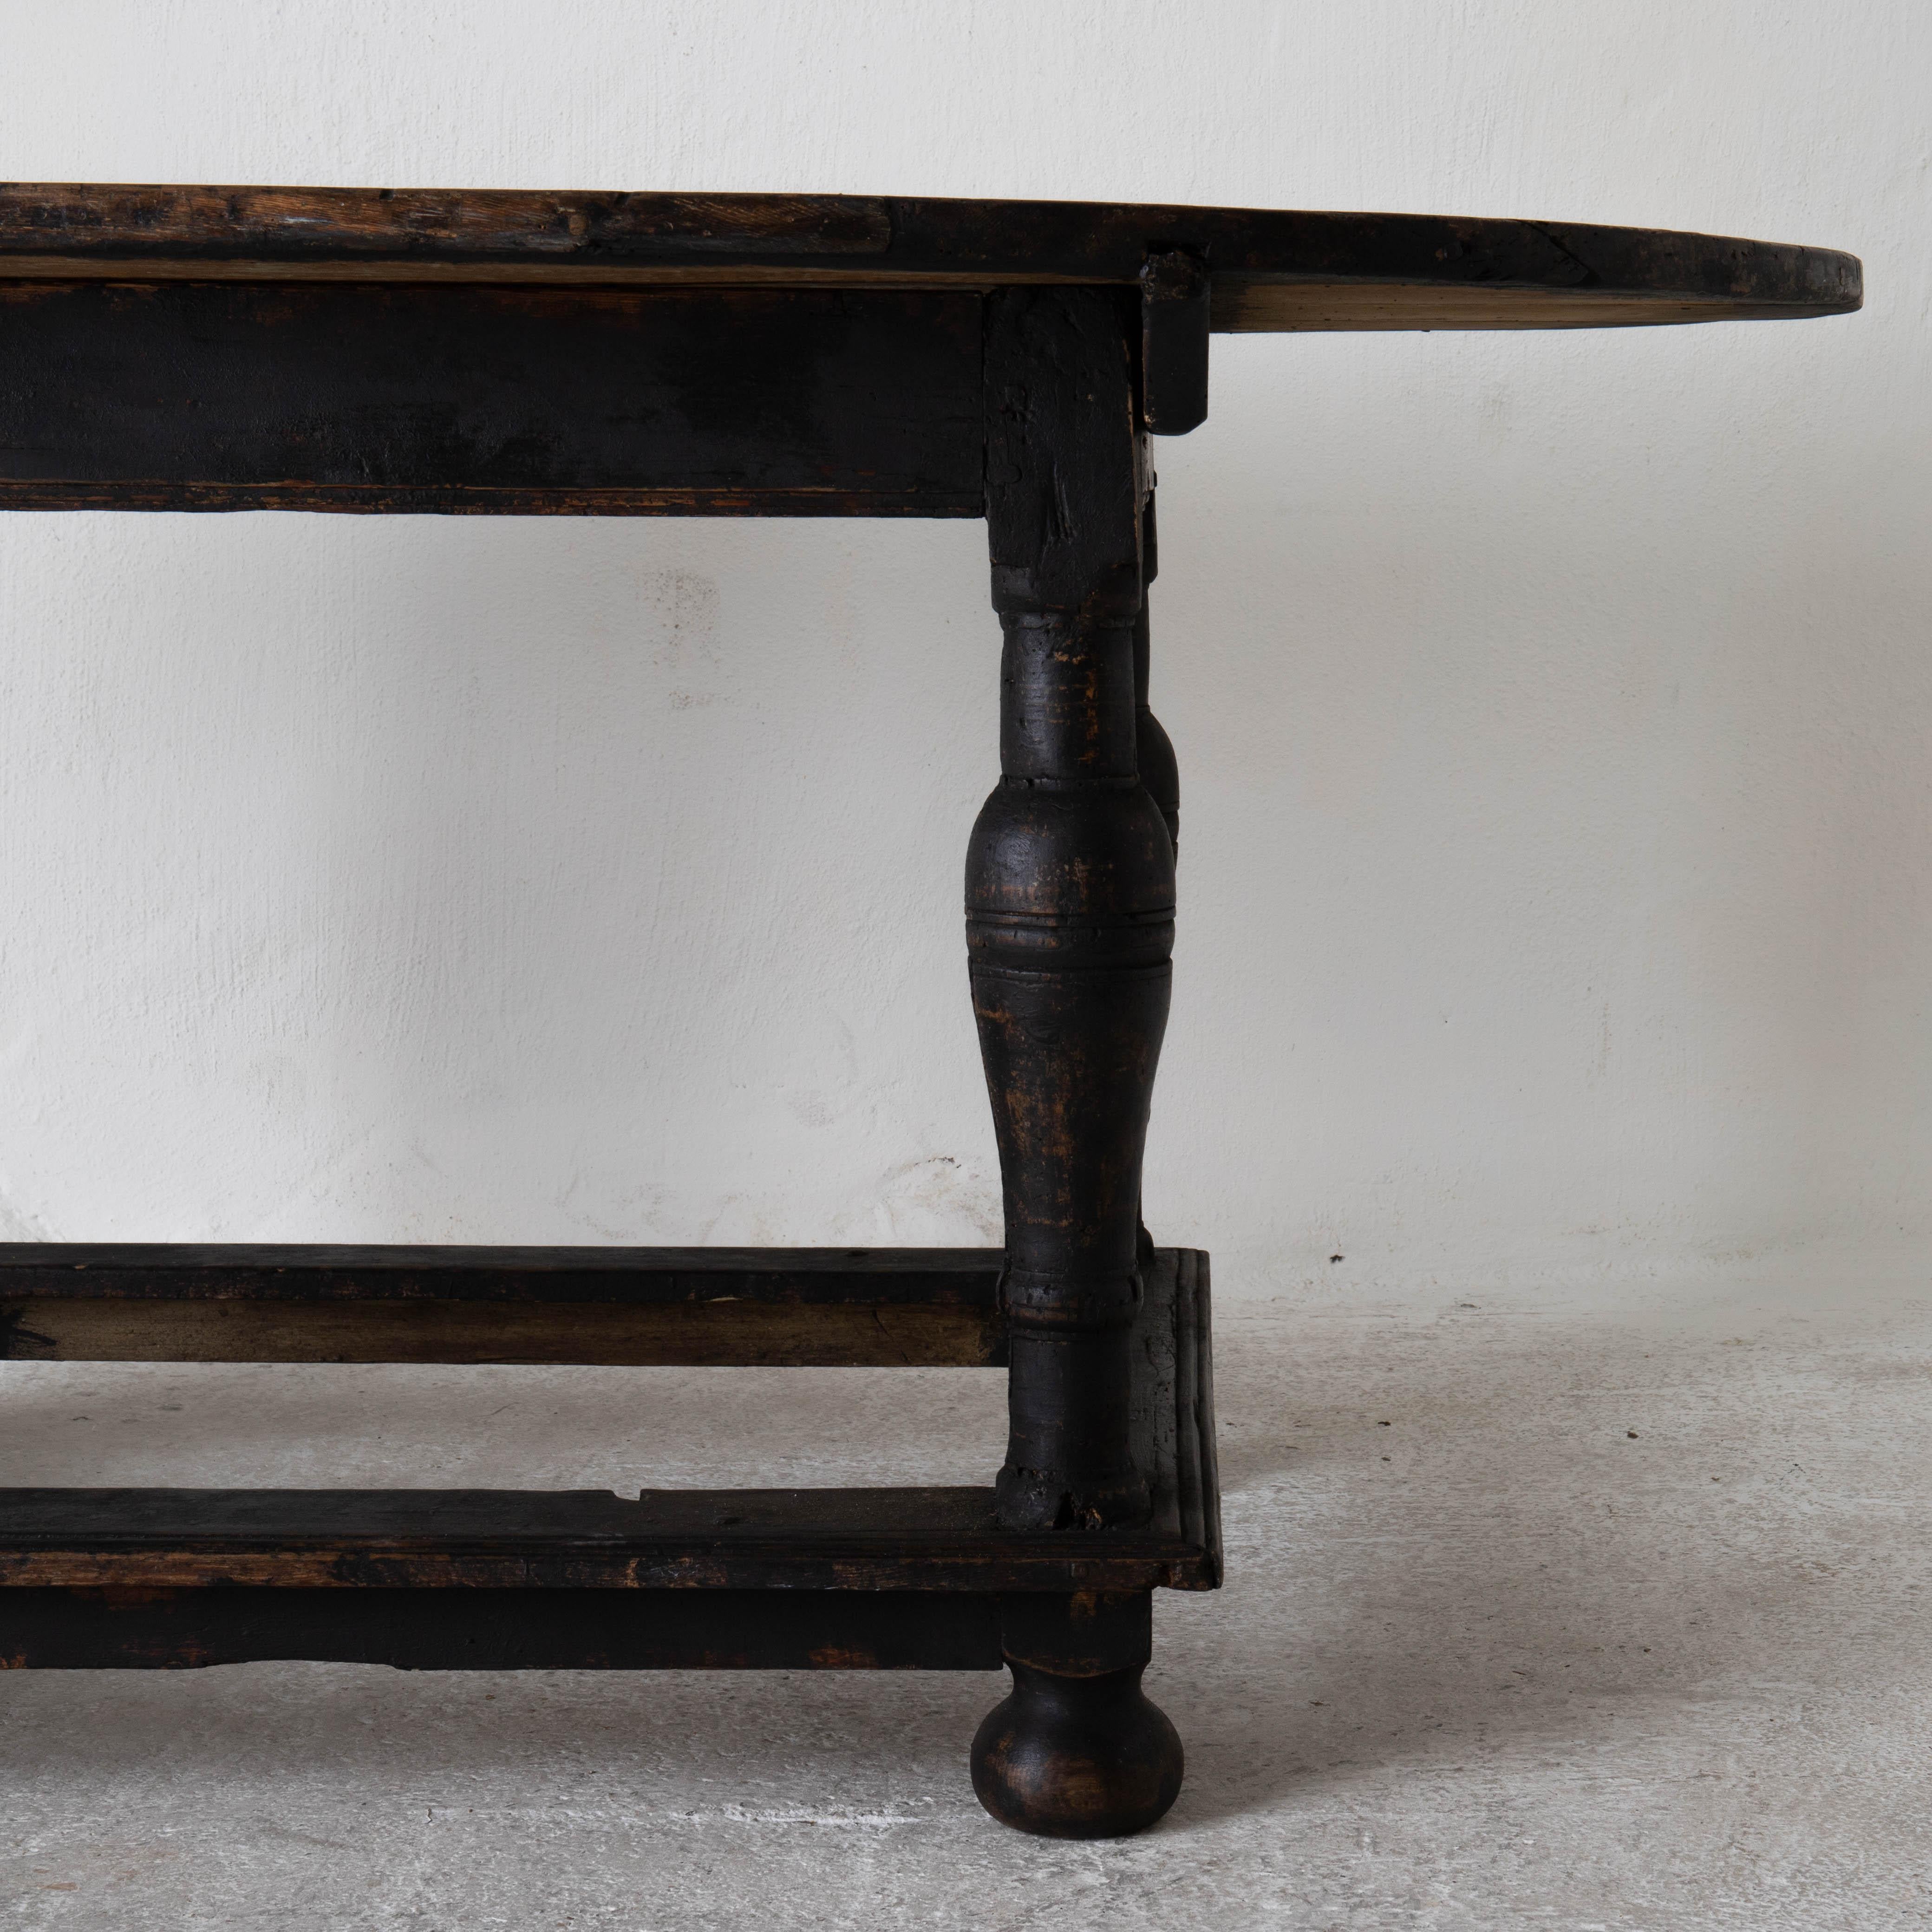 Table oval Swedish clack baroque 18th century Sweden. A library table made during the Baroque period in Sweden, 1650-1750. Repainted in our Laserow black. Oval top with a square base and rounded legs standing on ball feet. Perfect as a centre table